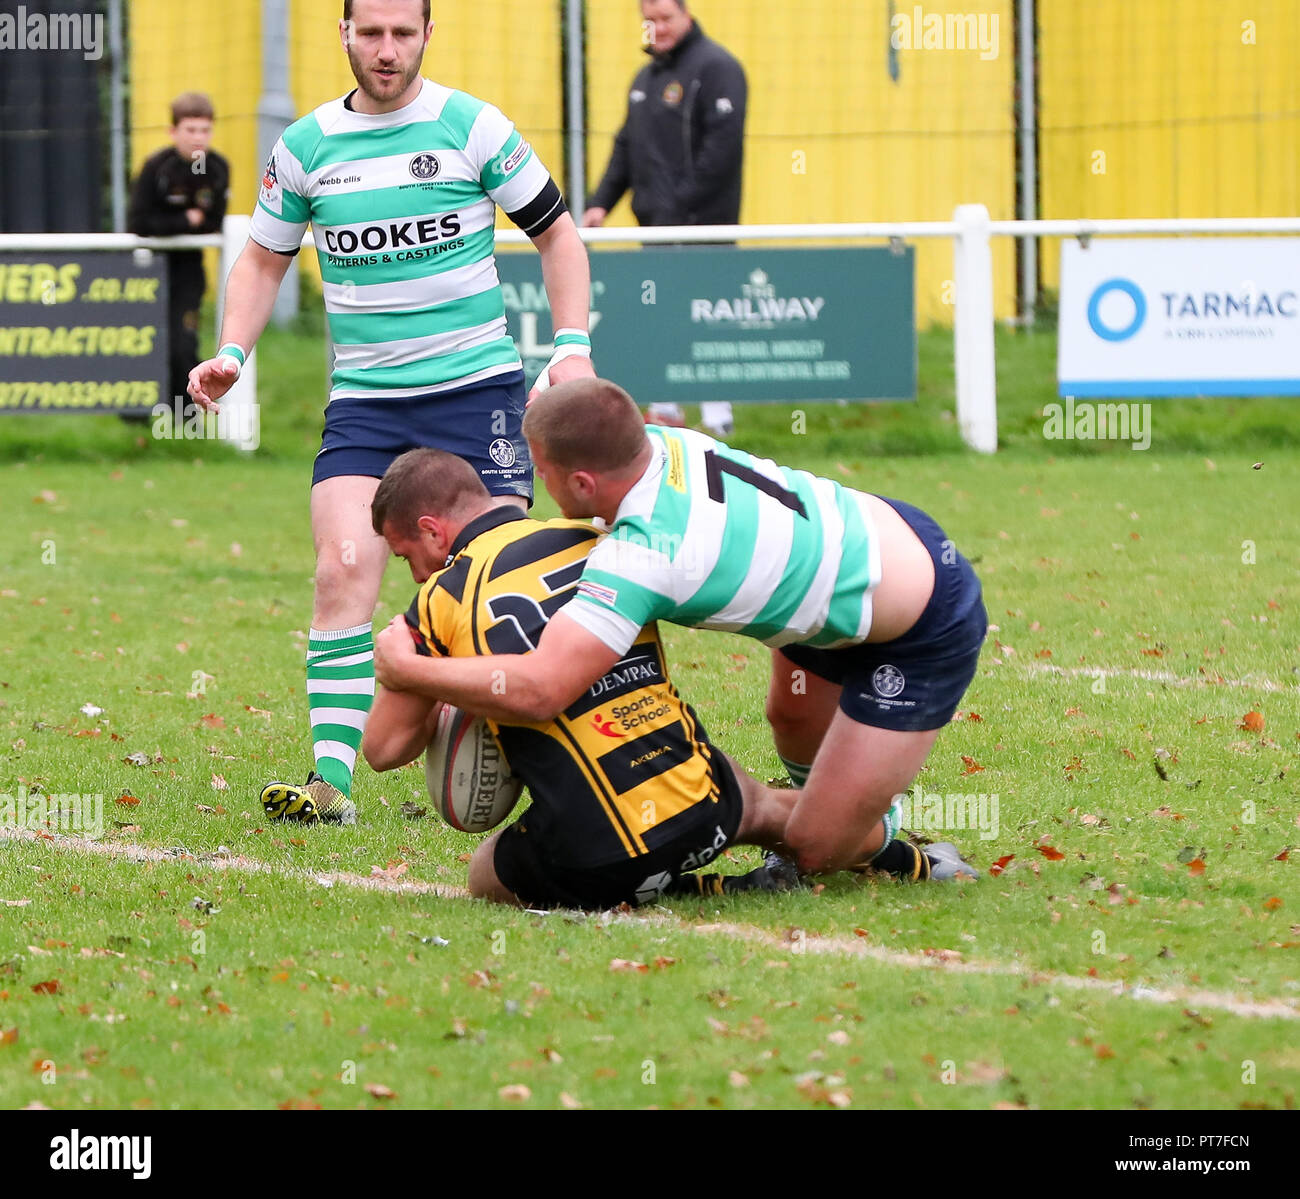 Leicester, England. Rugby Union, Hinckley rfc v South Leicester rfc.   Man of the Match Mitch Lamb scores after 37 minutes for Hinckley during the RFU National League 2 North (NL2N) game played at the Leicester  Road Stadium.  © Phil Hutchinson / Alamy Live News Stock Photo